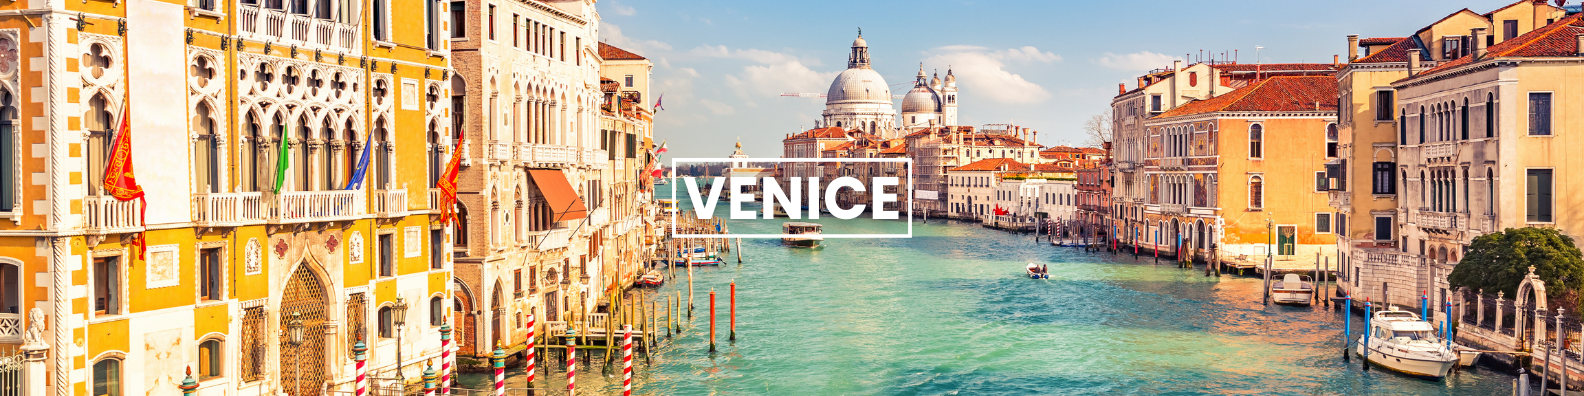 a large body of water surrounded by buildings in venice italy . Barter's Travelnet 